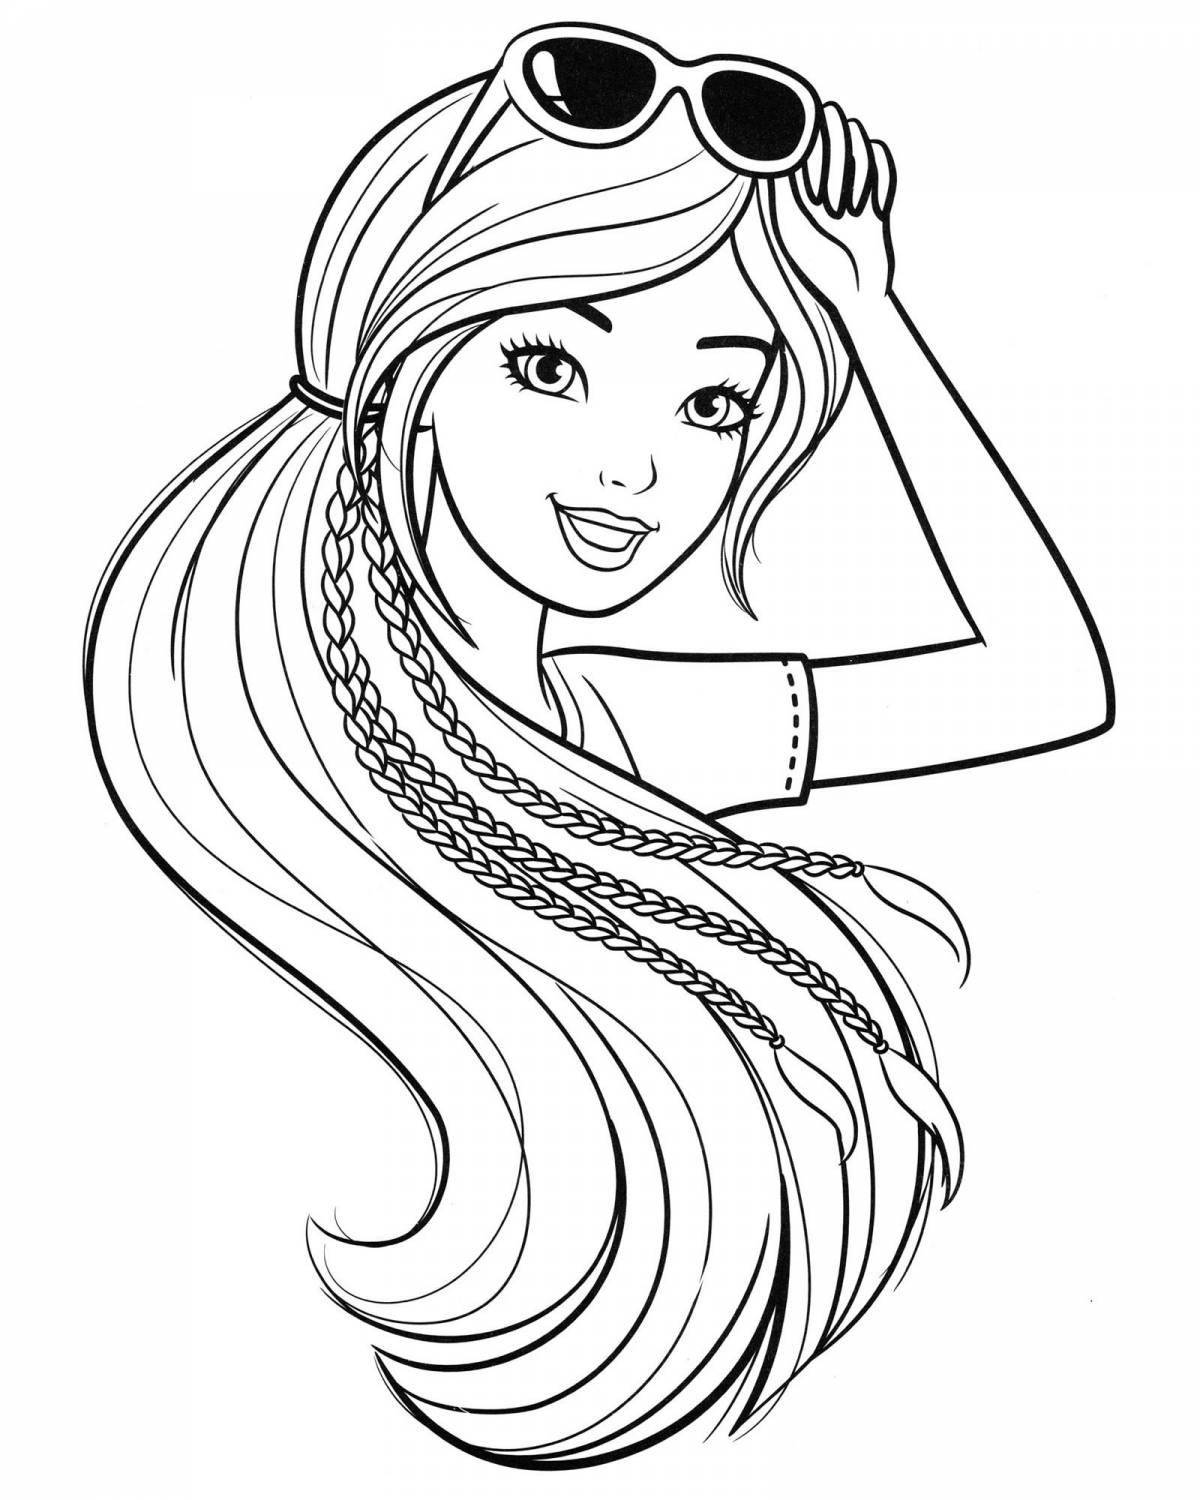 Charming coloring book for girls 9 years old